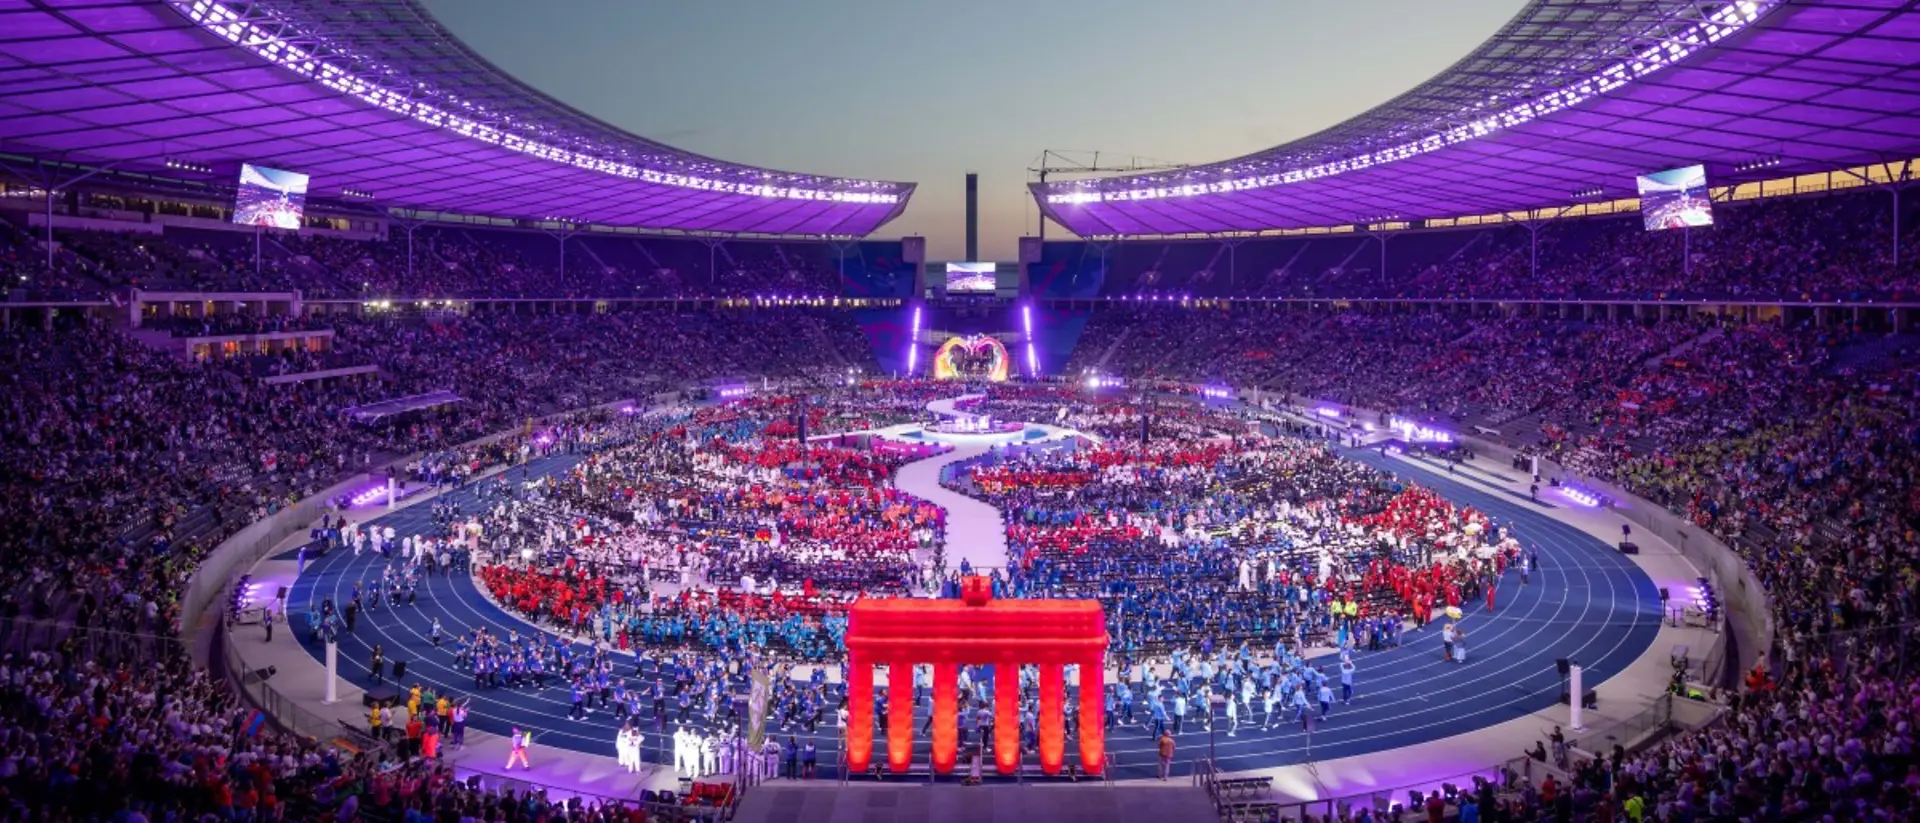 The large stadium in Berlin, where the Special Olympics 2023 took place, is full of people and lit up with colorful lights.